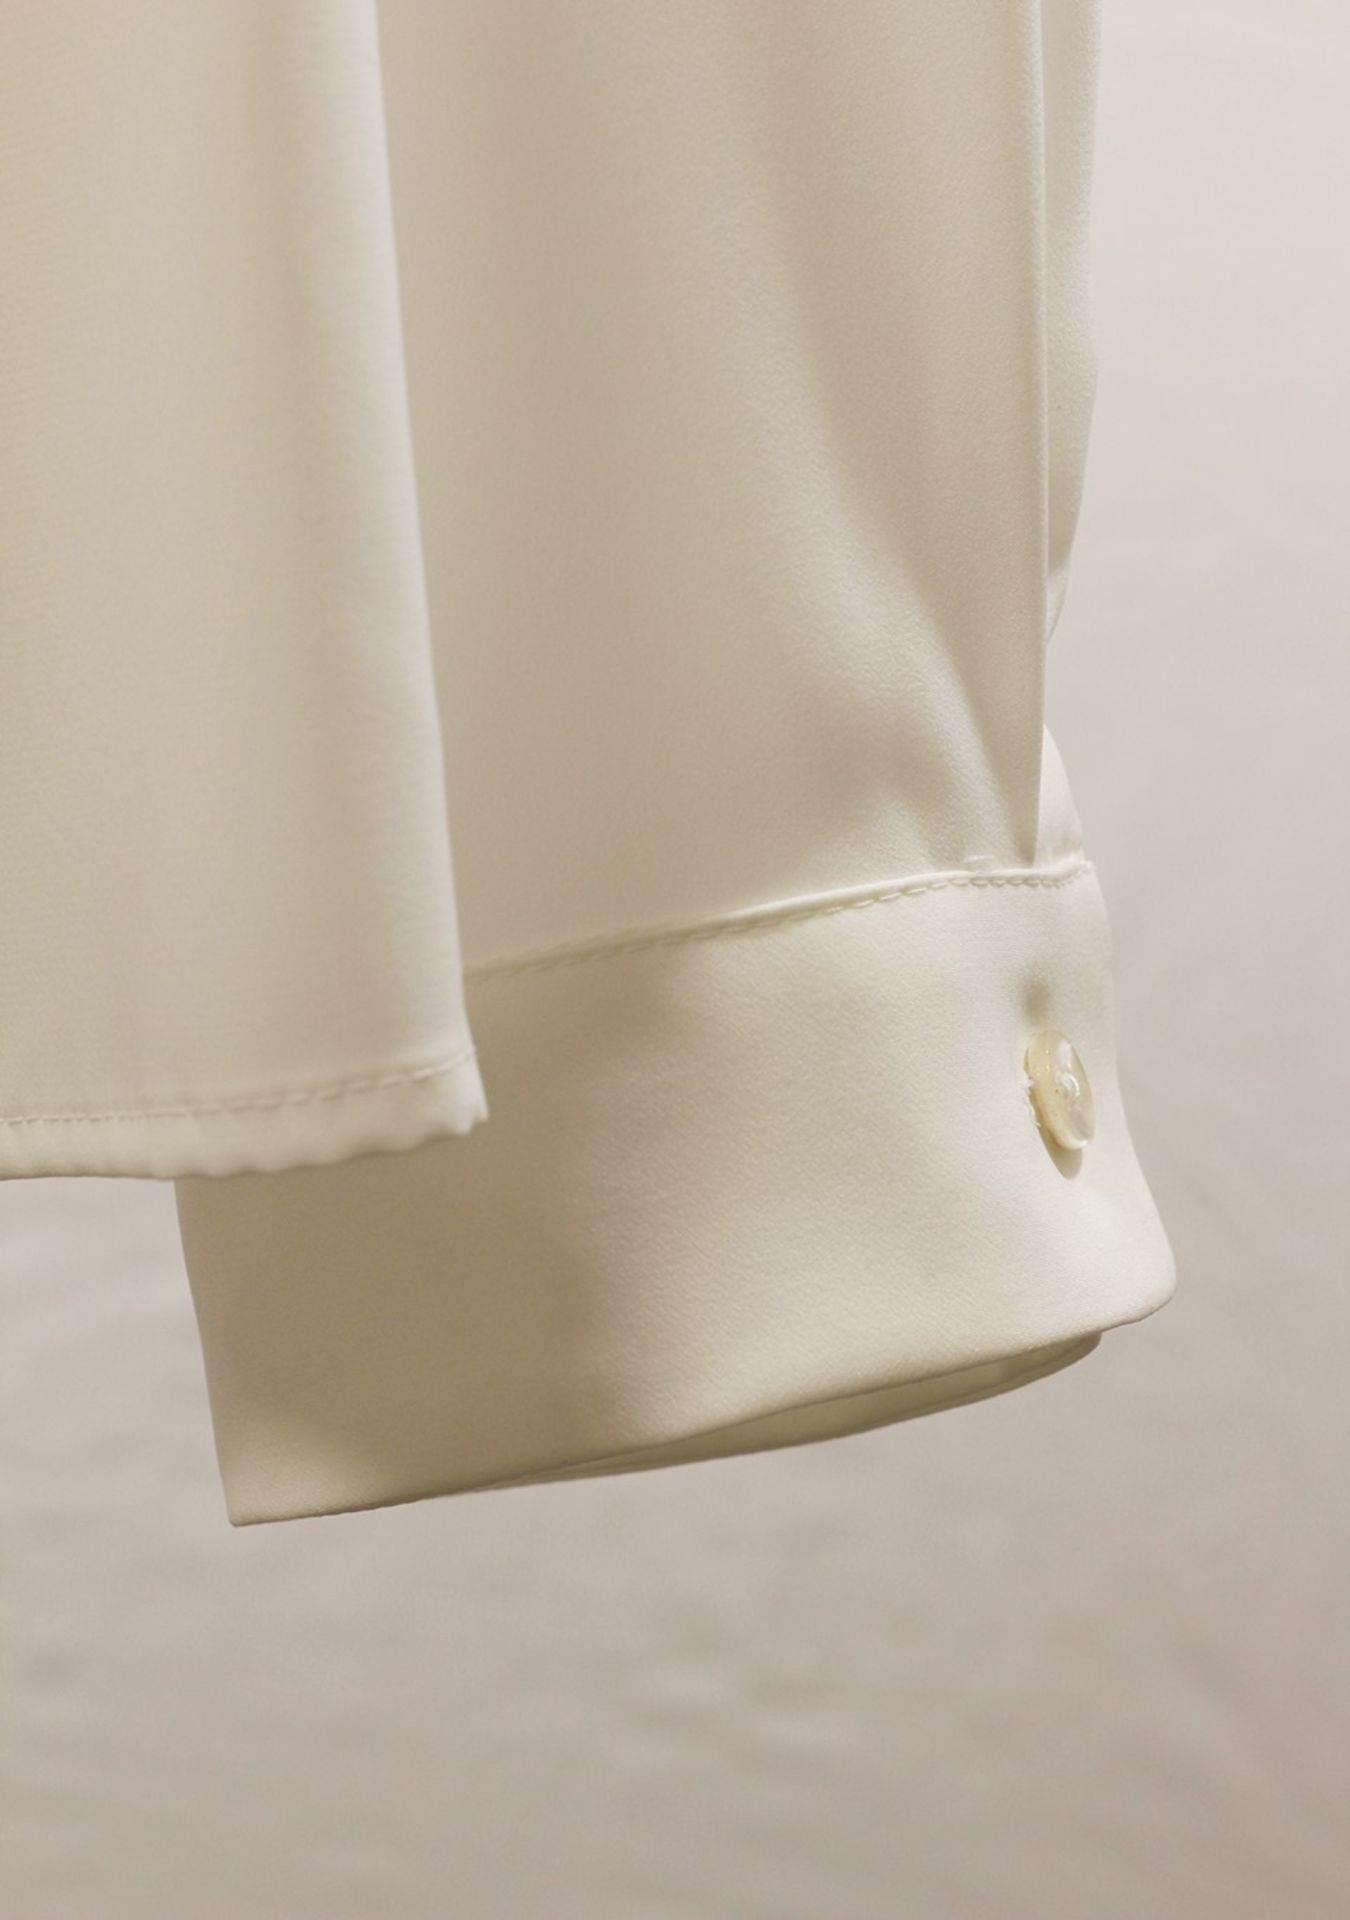 1 x Anne Belin White Shirt - Size: 18 - Material: 100% Polyester - From a High End Clothing Boutique - Image 7 of 9